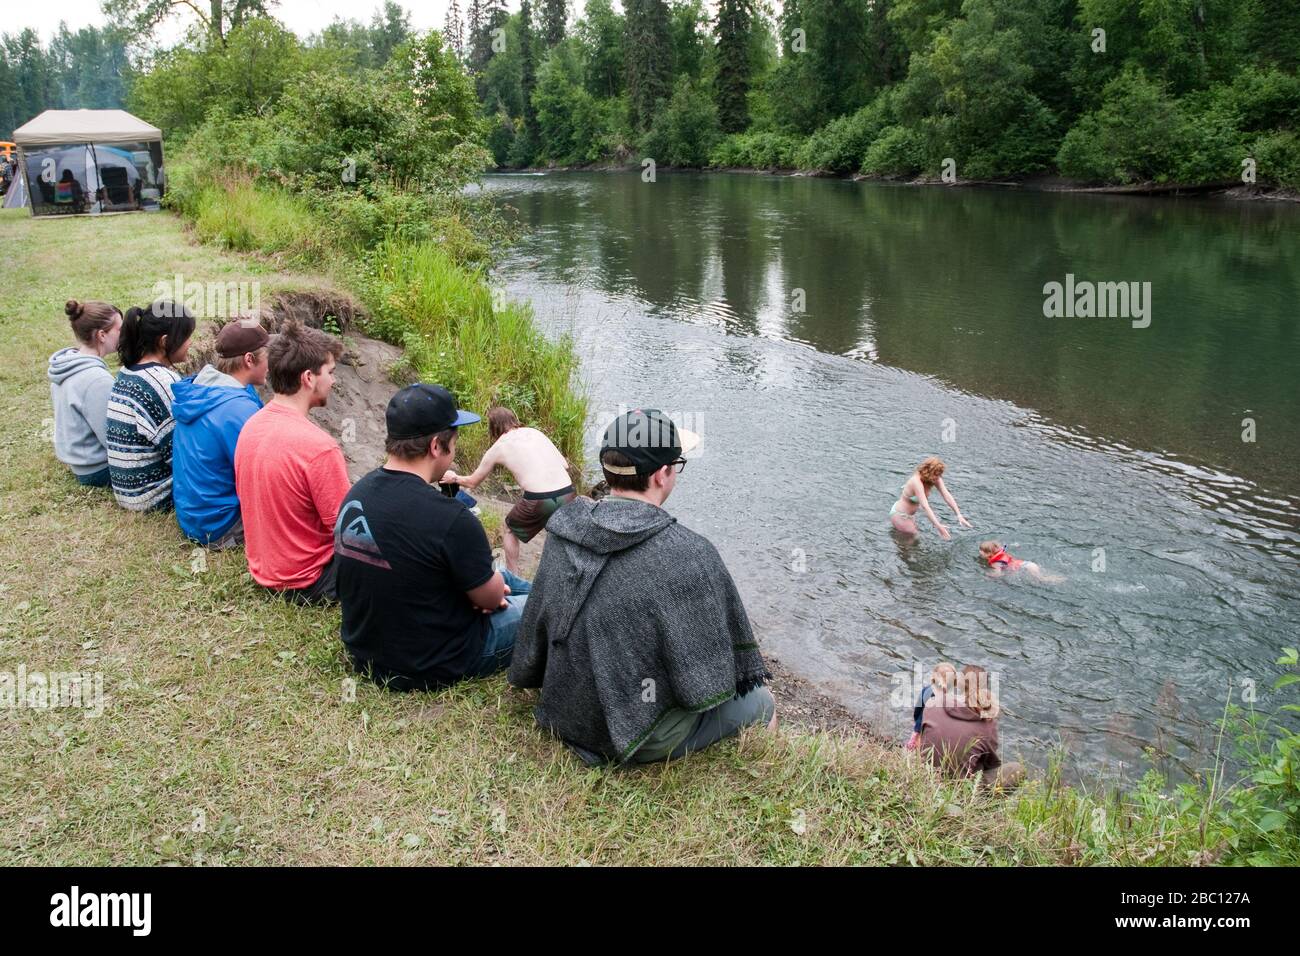 Locals swimming in the Kispiox River, a tributary of the Skeena River, in Gitsxan First Nation territory, Northern British Columbia, Canada. Stock Photo